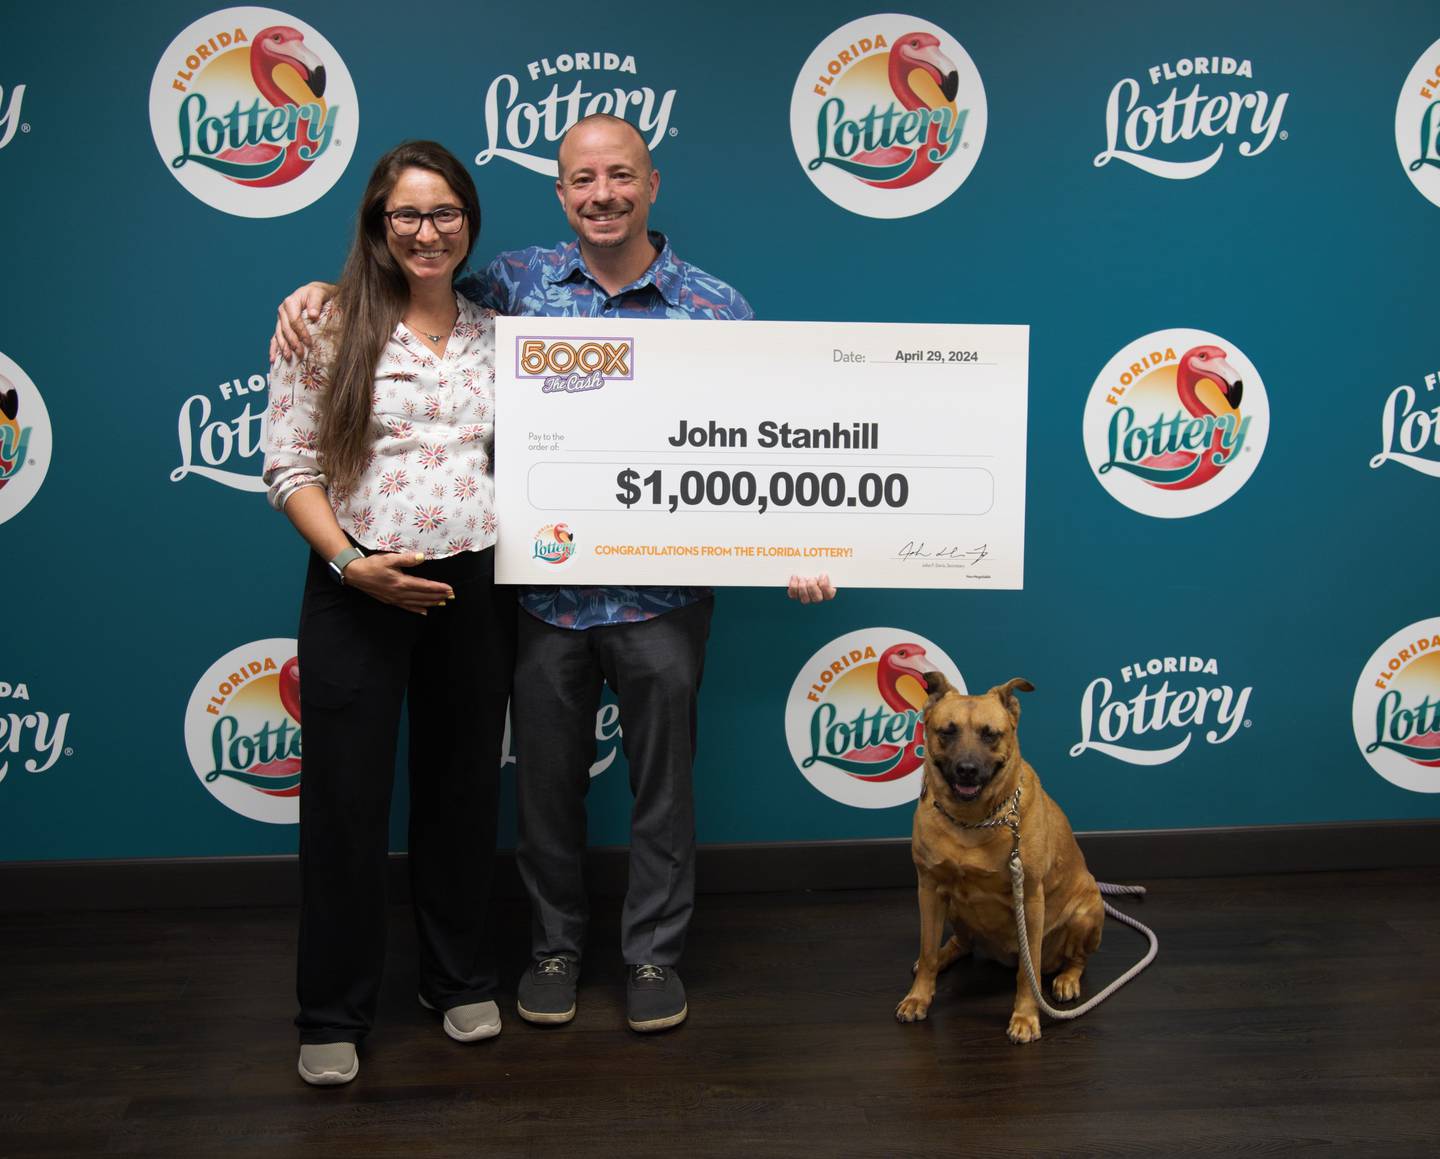 The winning couple chose to take the lump sum payment option of $640,000.